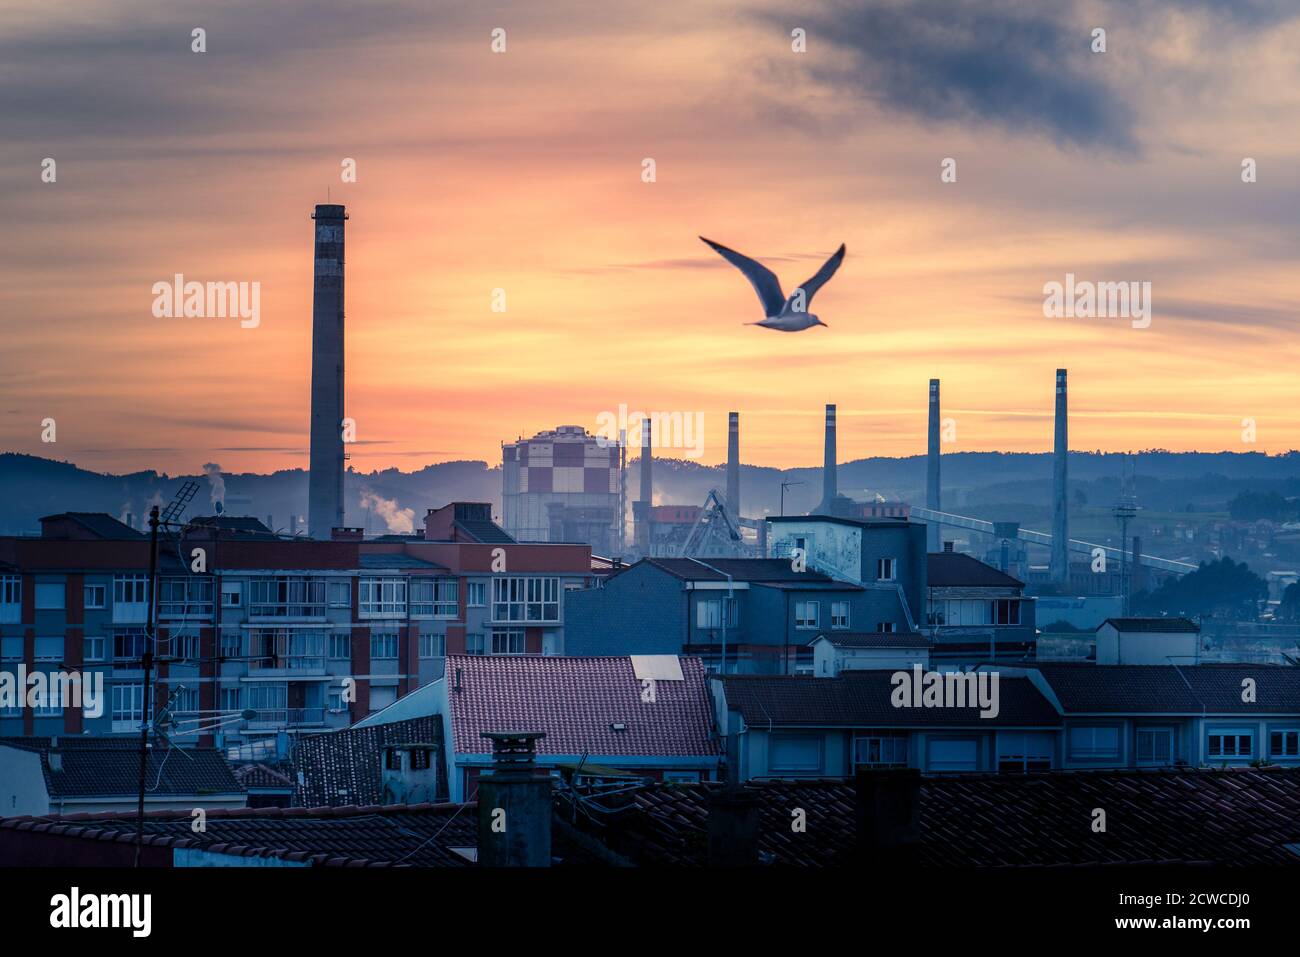 Seagull flying over the industrial landscape of Aviles Stock Photo